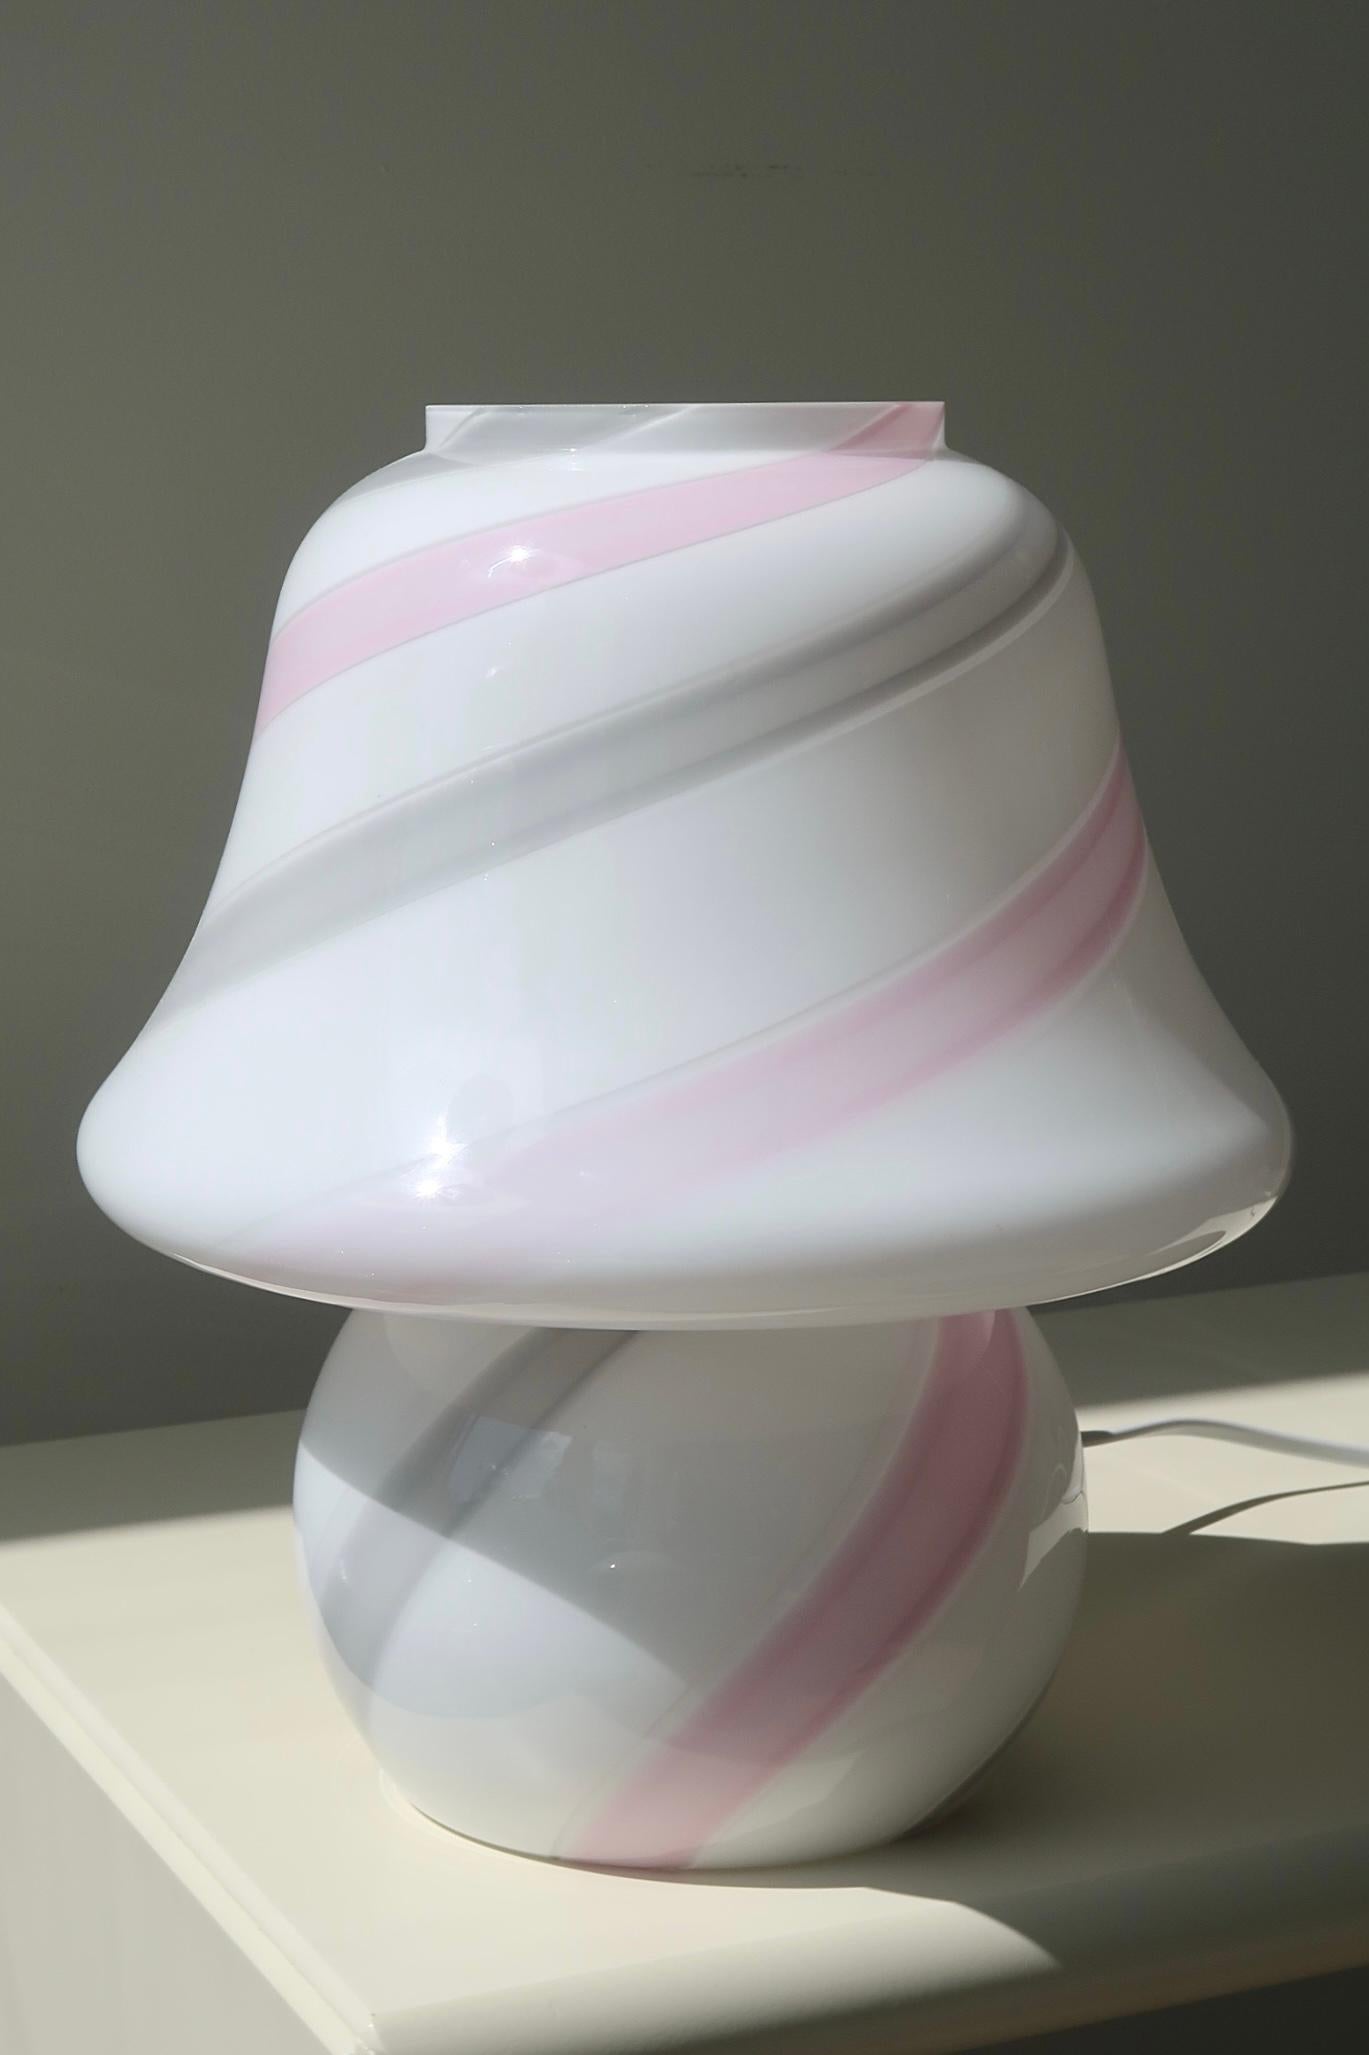 Vintage Murano candy mushroom lamp in medium size. The lamp is mouth-blown in a white opal glass with pink and gray swirl. Handmade in Italy, 1960s/70s, and comes with new white cord as well as original label.

H: 28 cm D: 23 cm.

